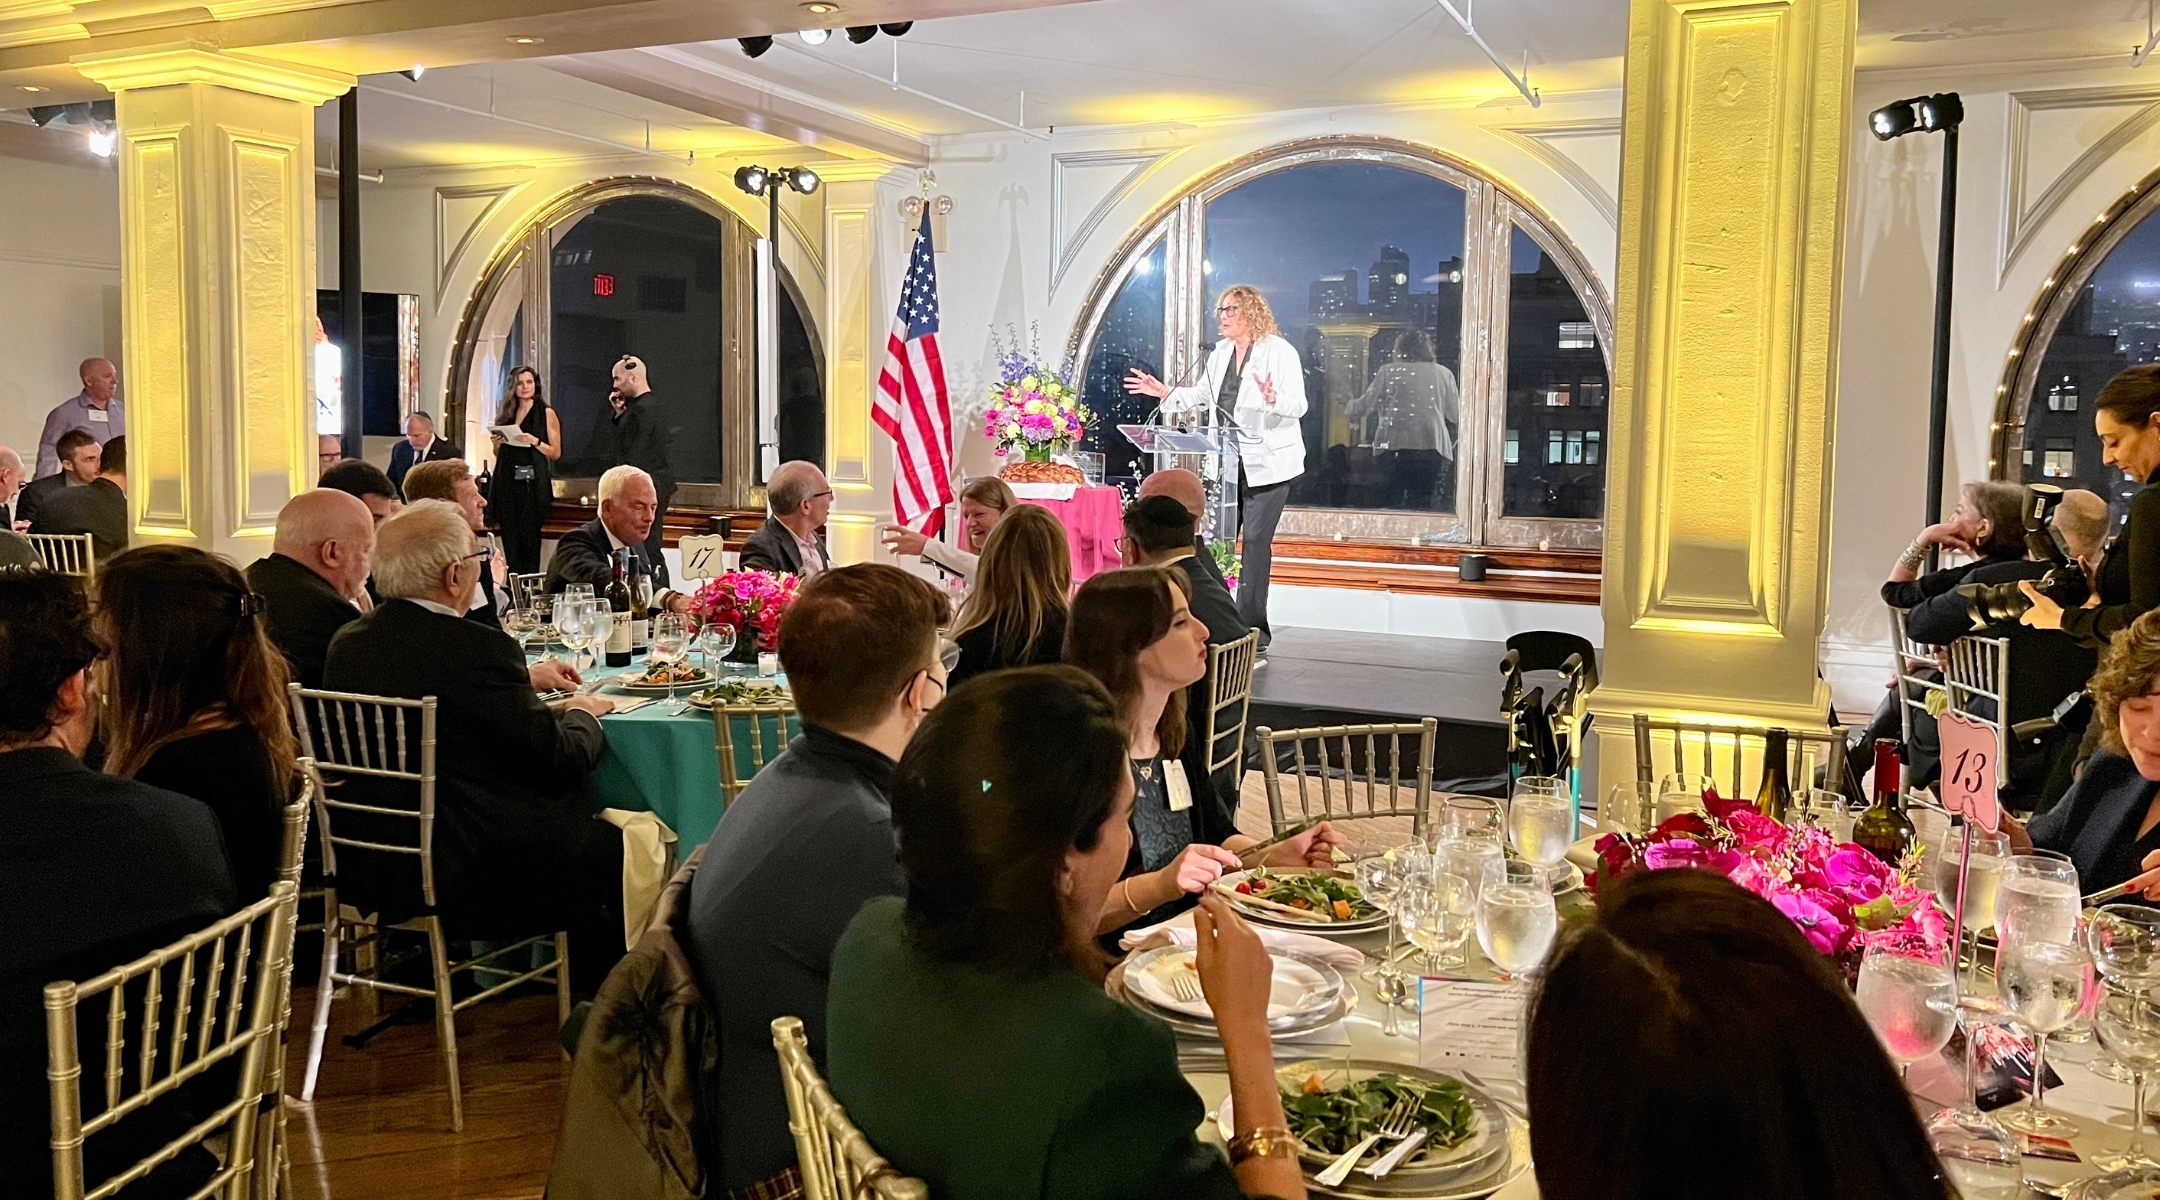 Comedian Judy Gold hosted A Wider Bridge’s annual gala, which celebrated Israel at 75 and addressed growing anti-LGBTQ sentiment with the new government coalition elected in January. (Jackie Hajdenberg)